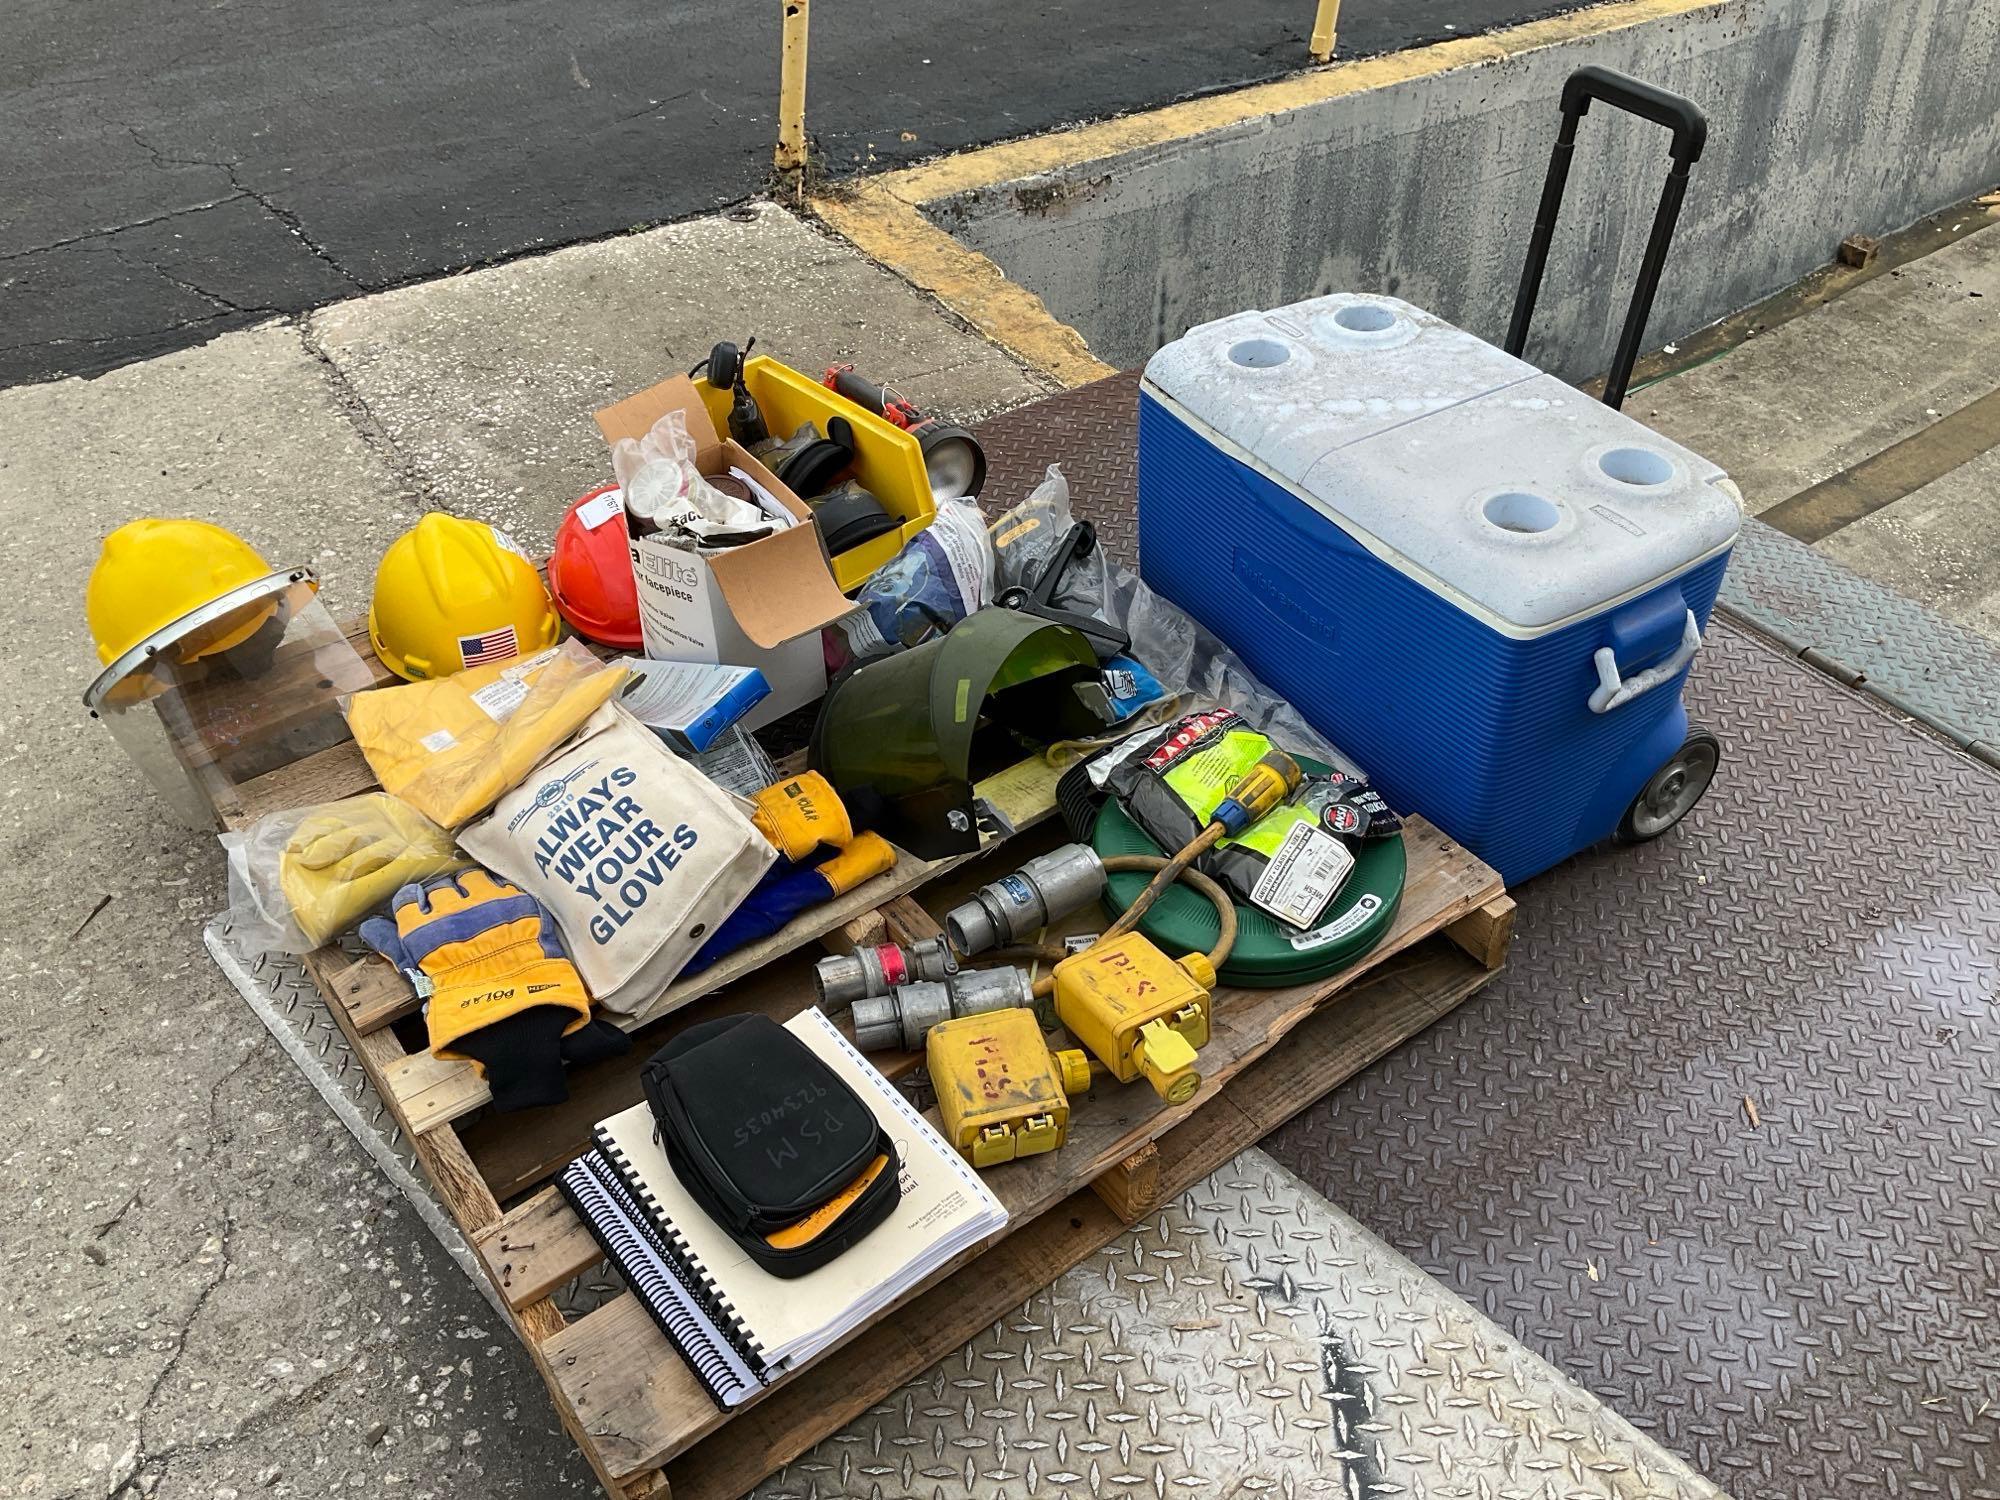 PALLET OF ASSORTED SUPPLIES/TOOLS/ETC.